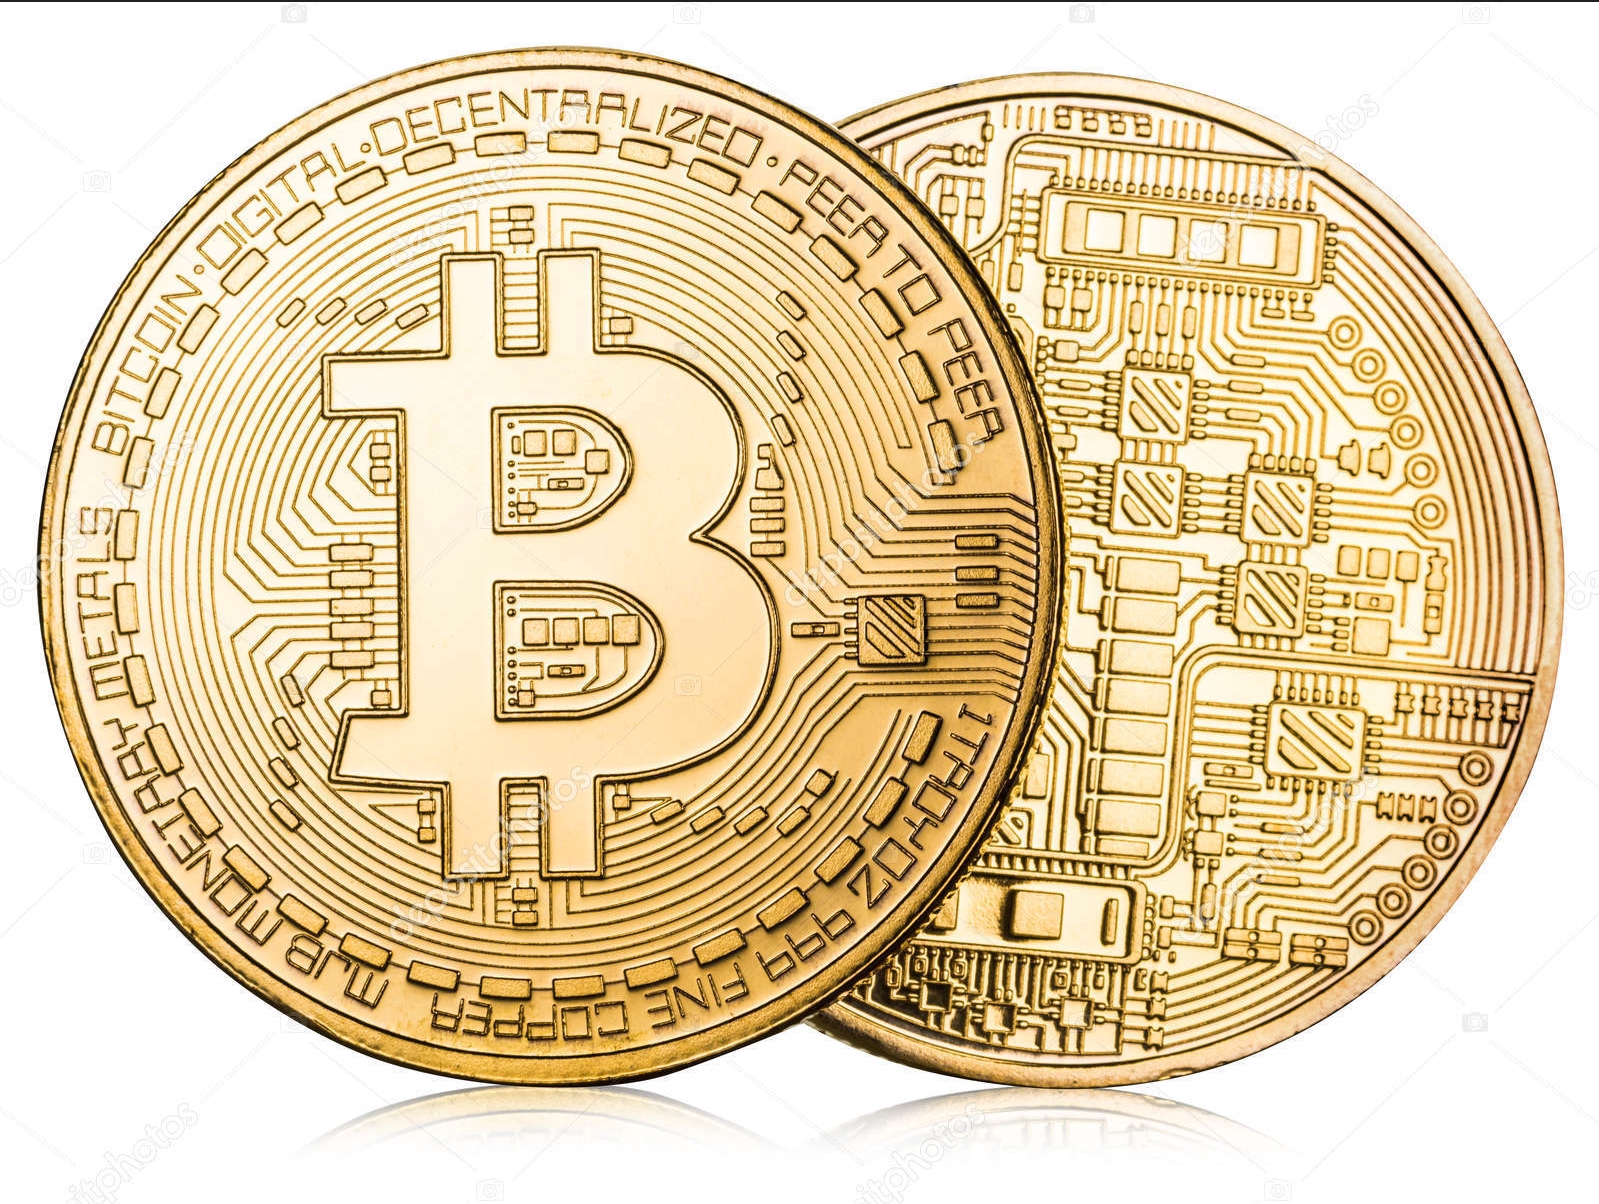 What’s Physical Bitcoin? And What Does a Bitcoin Look Like?